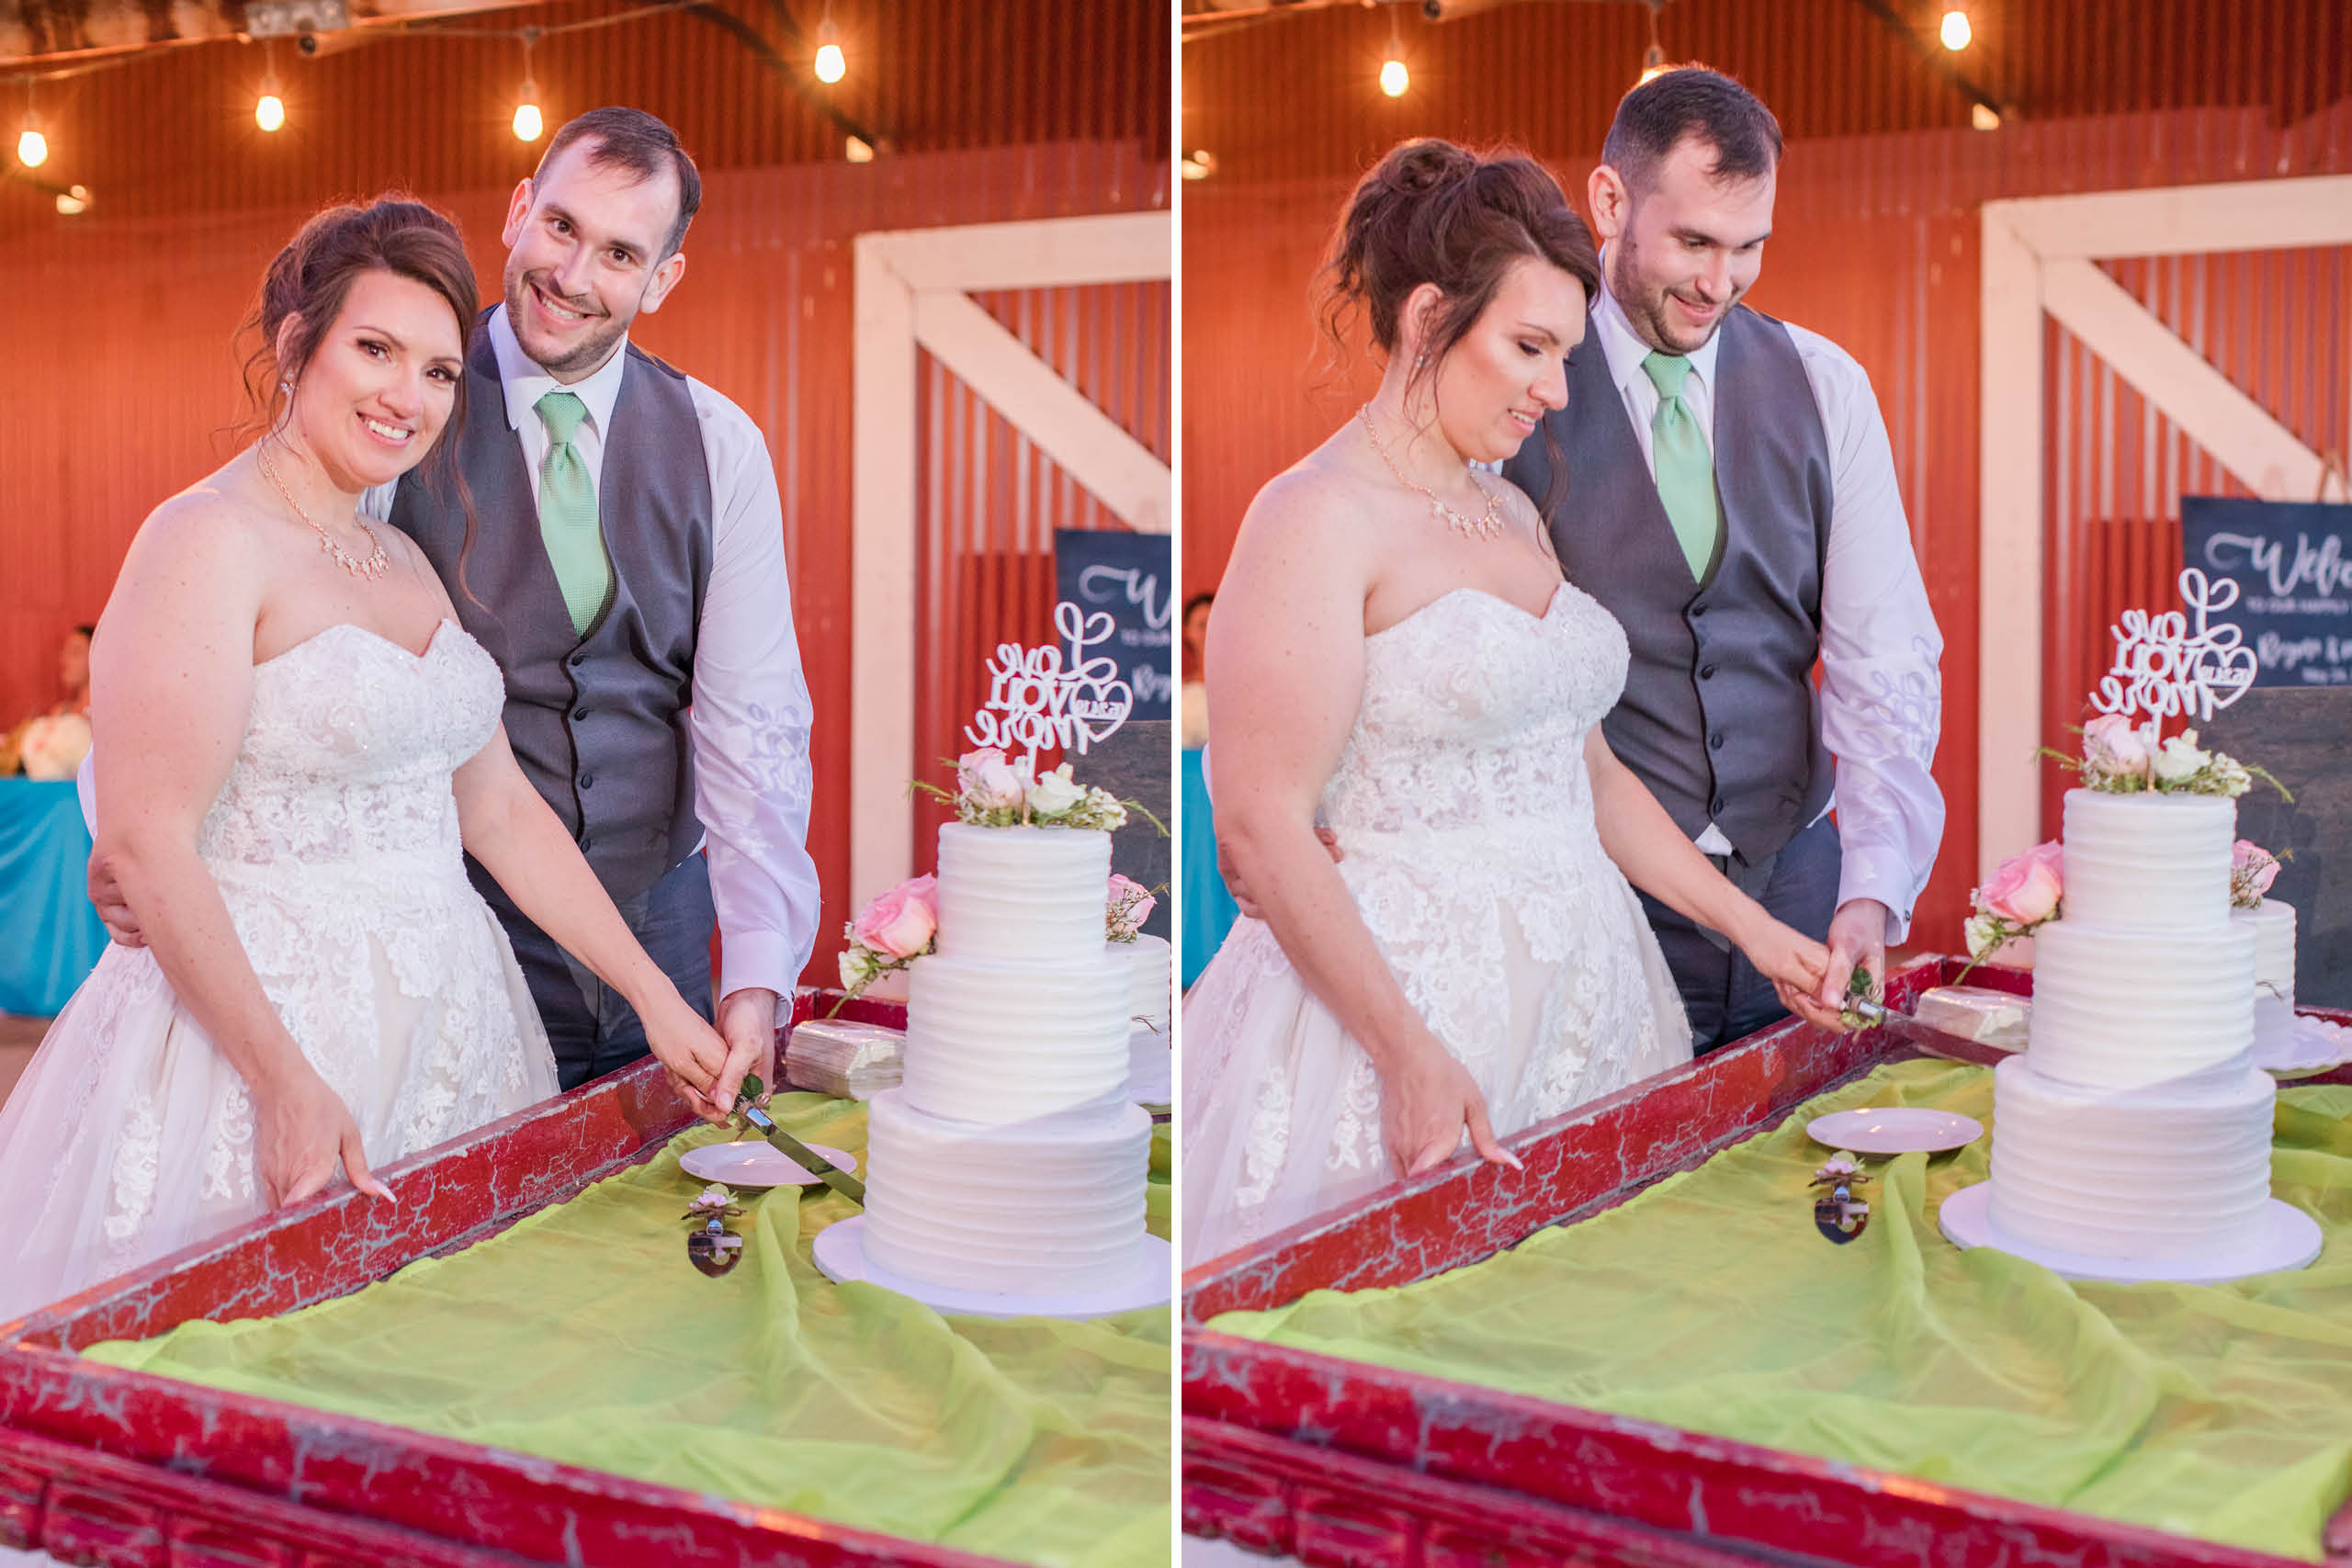 A teal Branch and Vine Wedding cake cutting